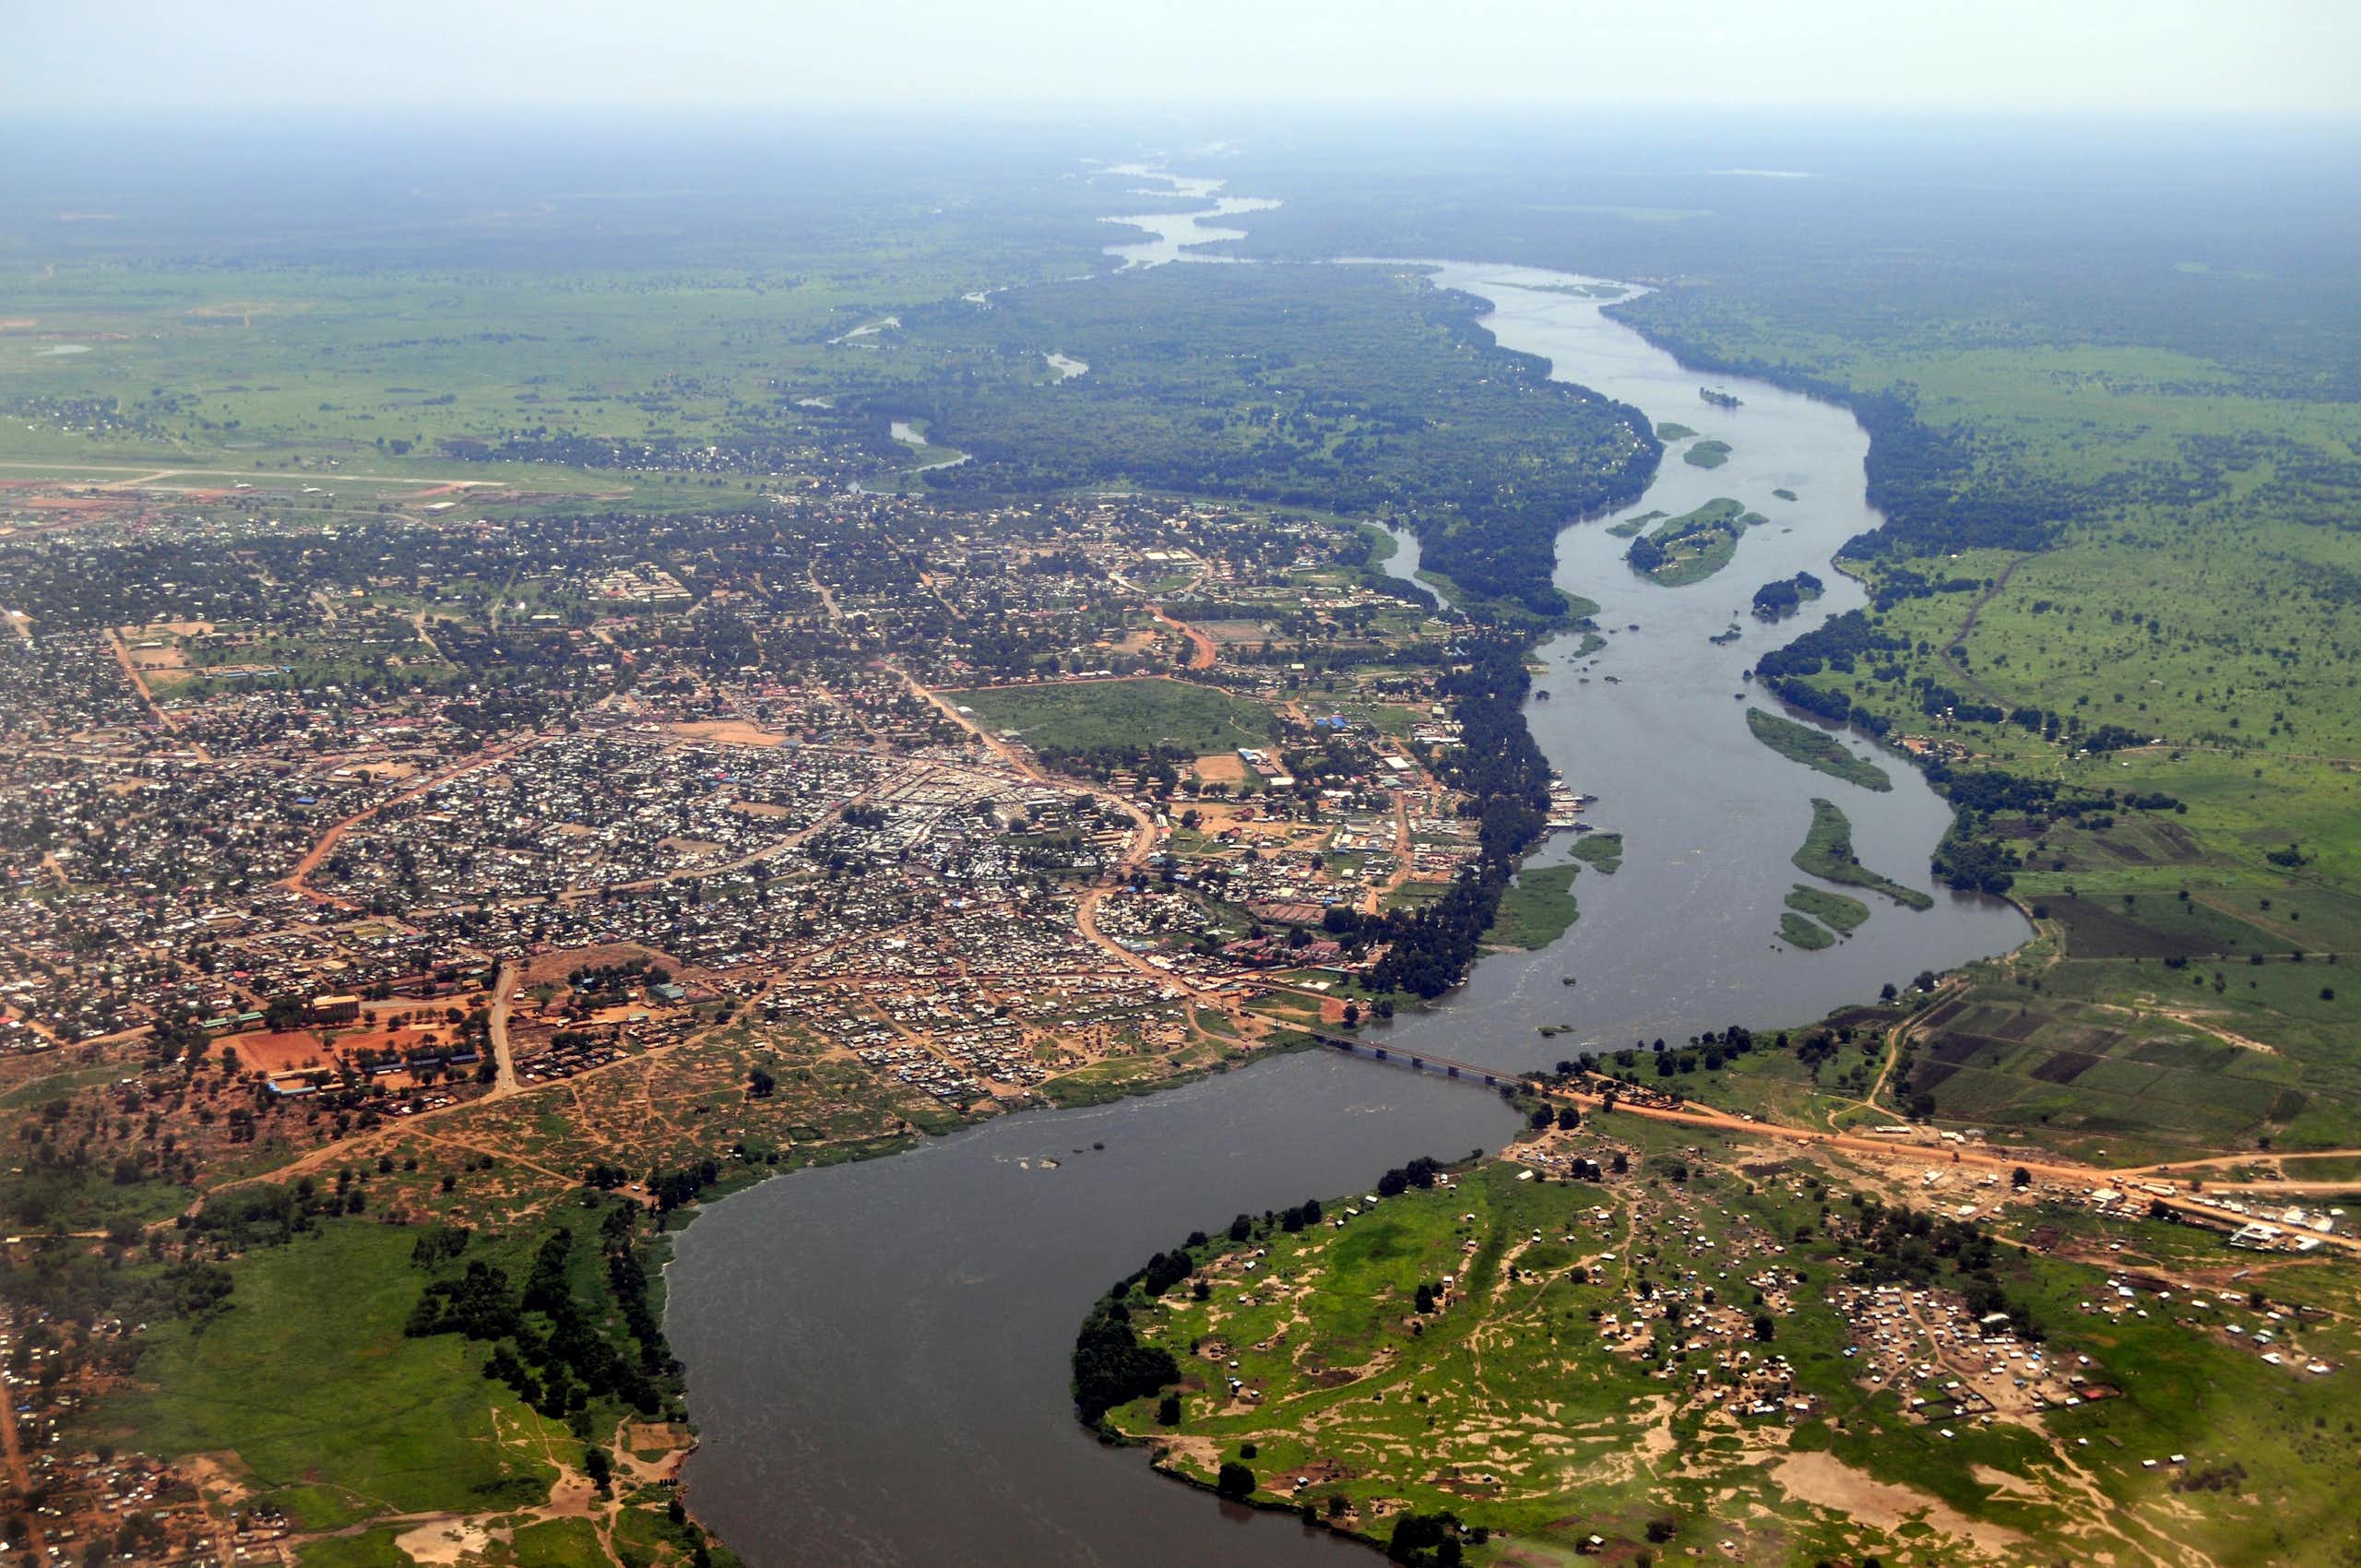 An aerial photograph of a river wending its way through green valleys, flanked on the left of the image by a sprawling city